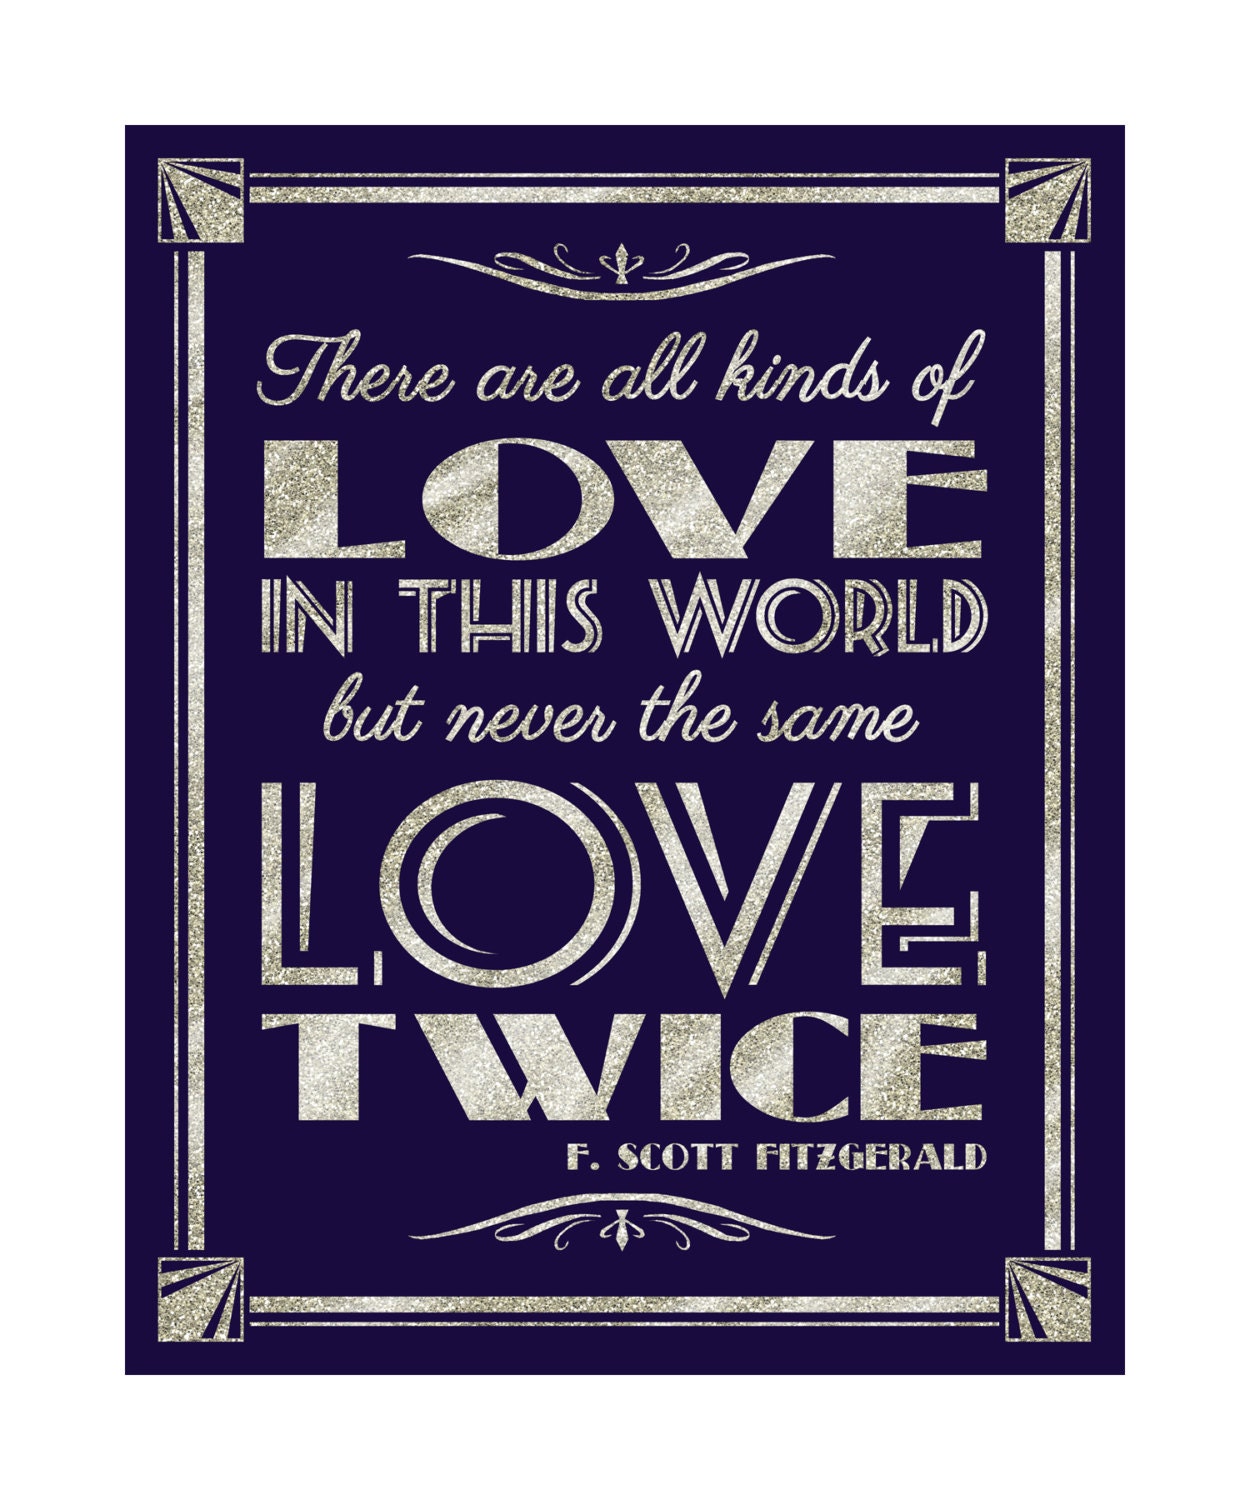 Printable NEVER the same LOVE TWICE fitzgerald quote Great Gatsby 1920 s theme instant digital file navy and glitter silver